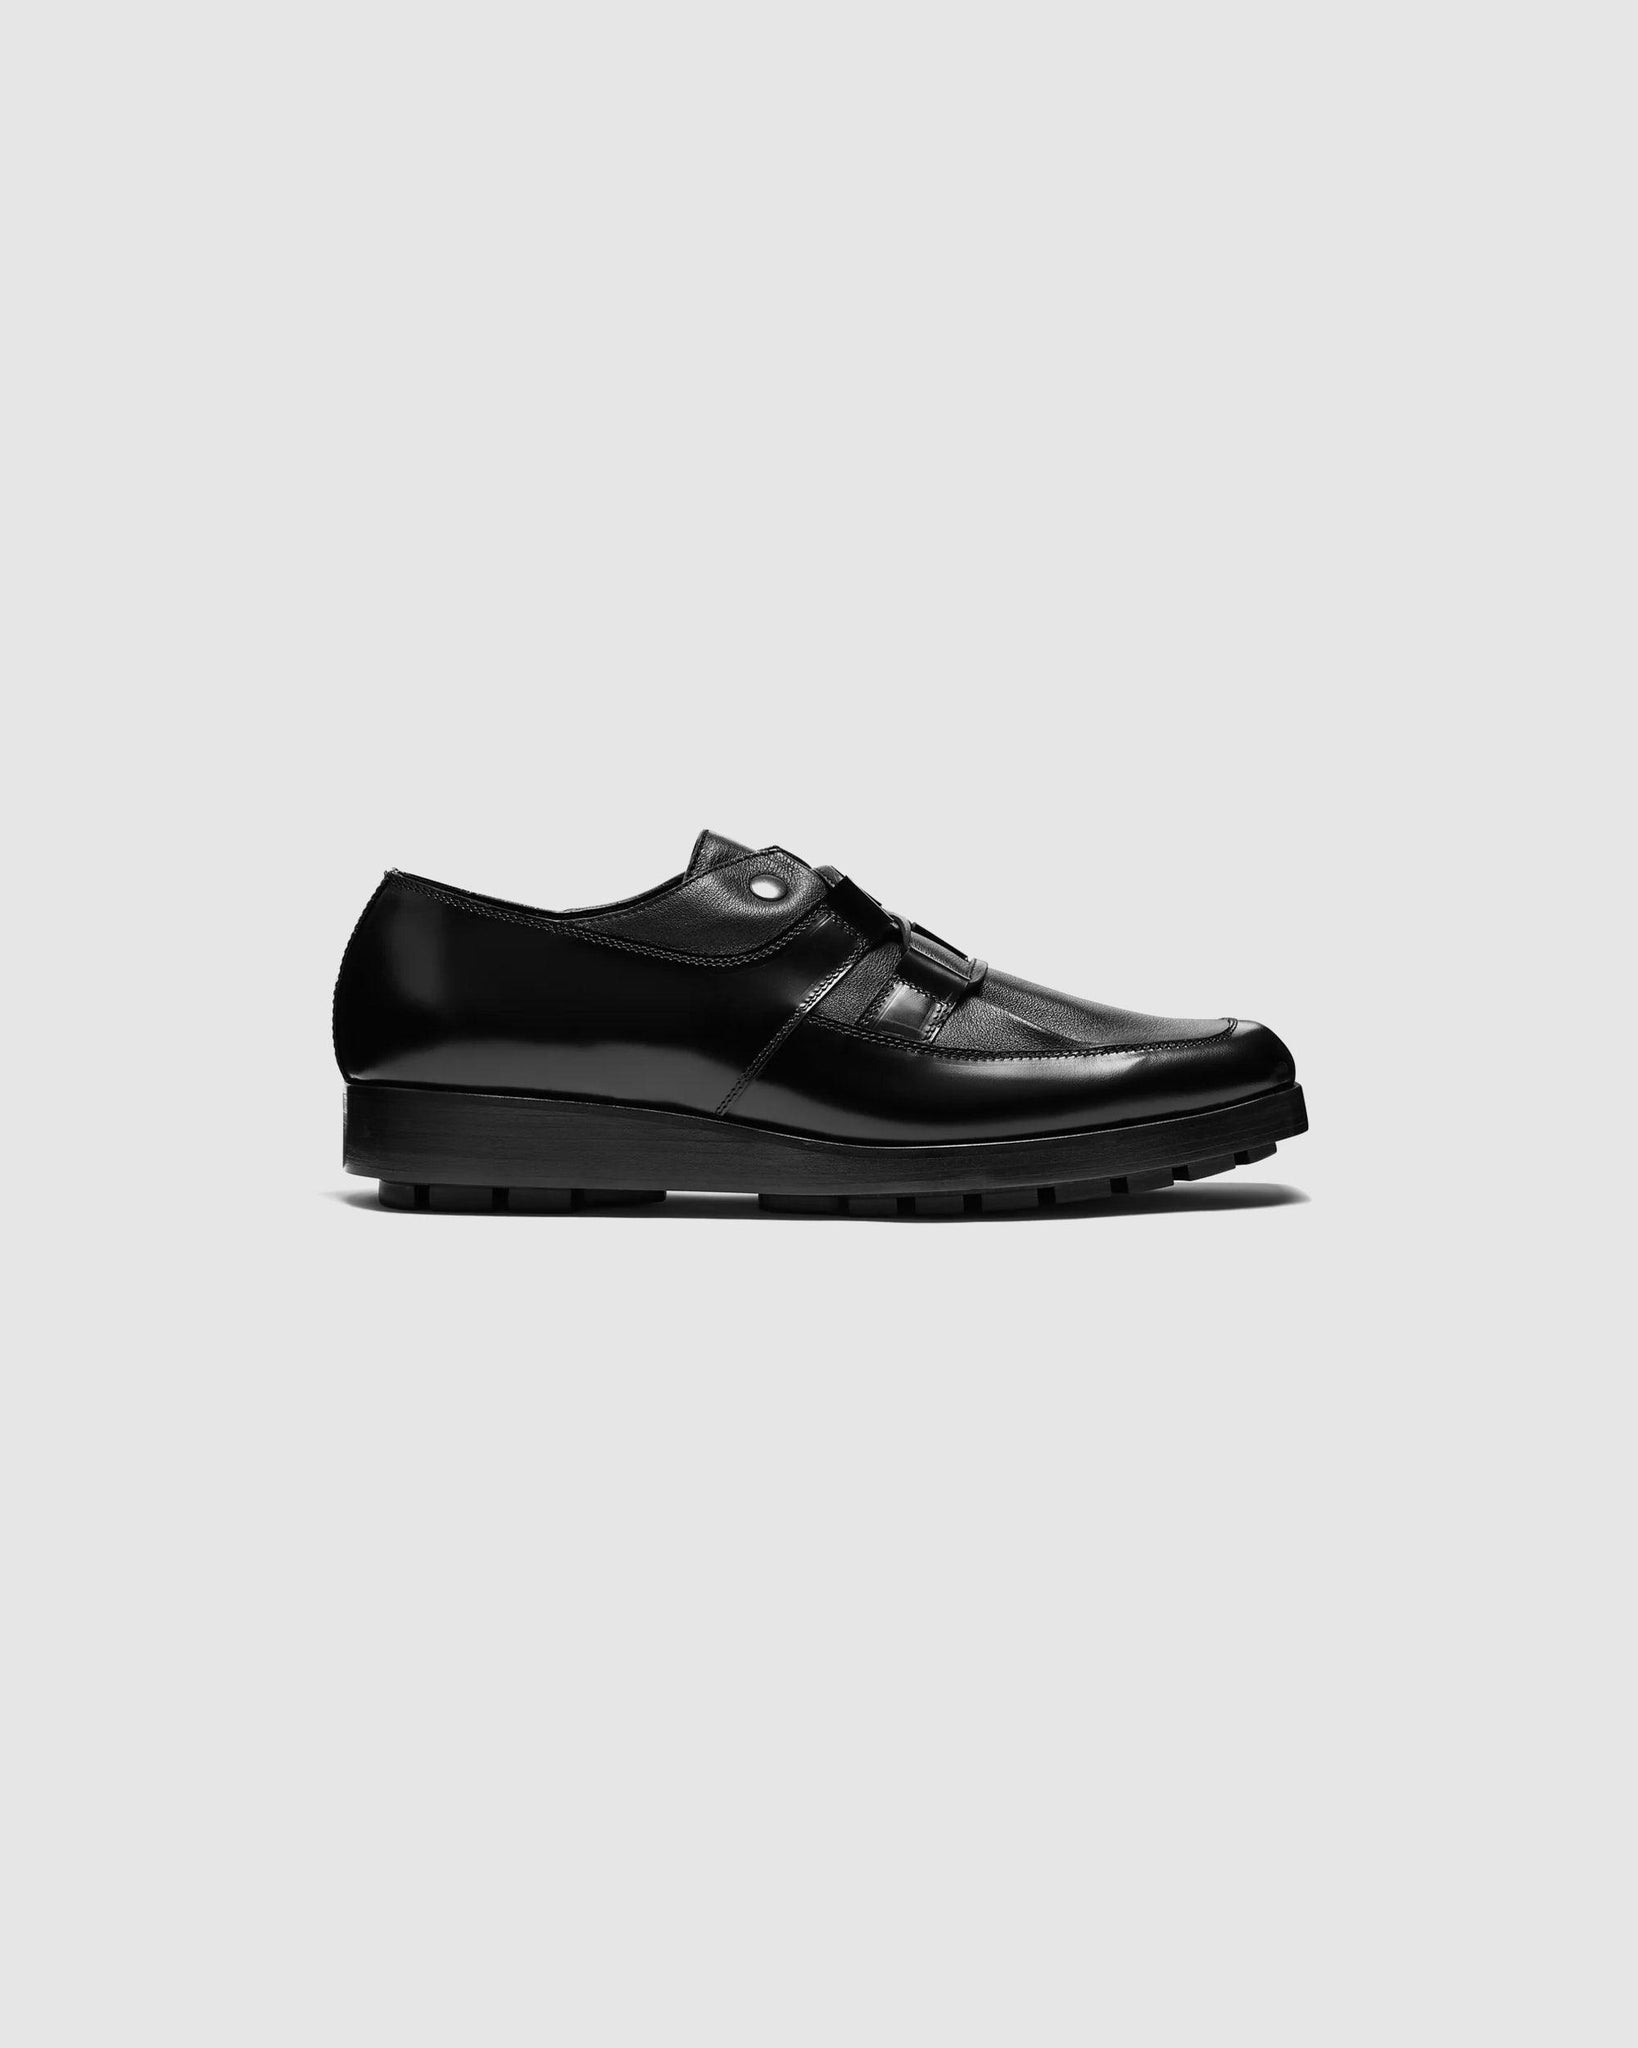 Priam Lace Up Shoe Raven Black - {{ collection.title }} - Chinatown Country Club 